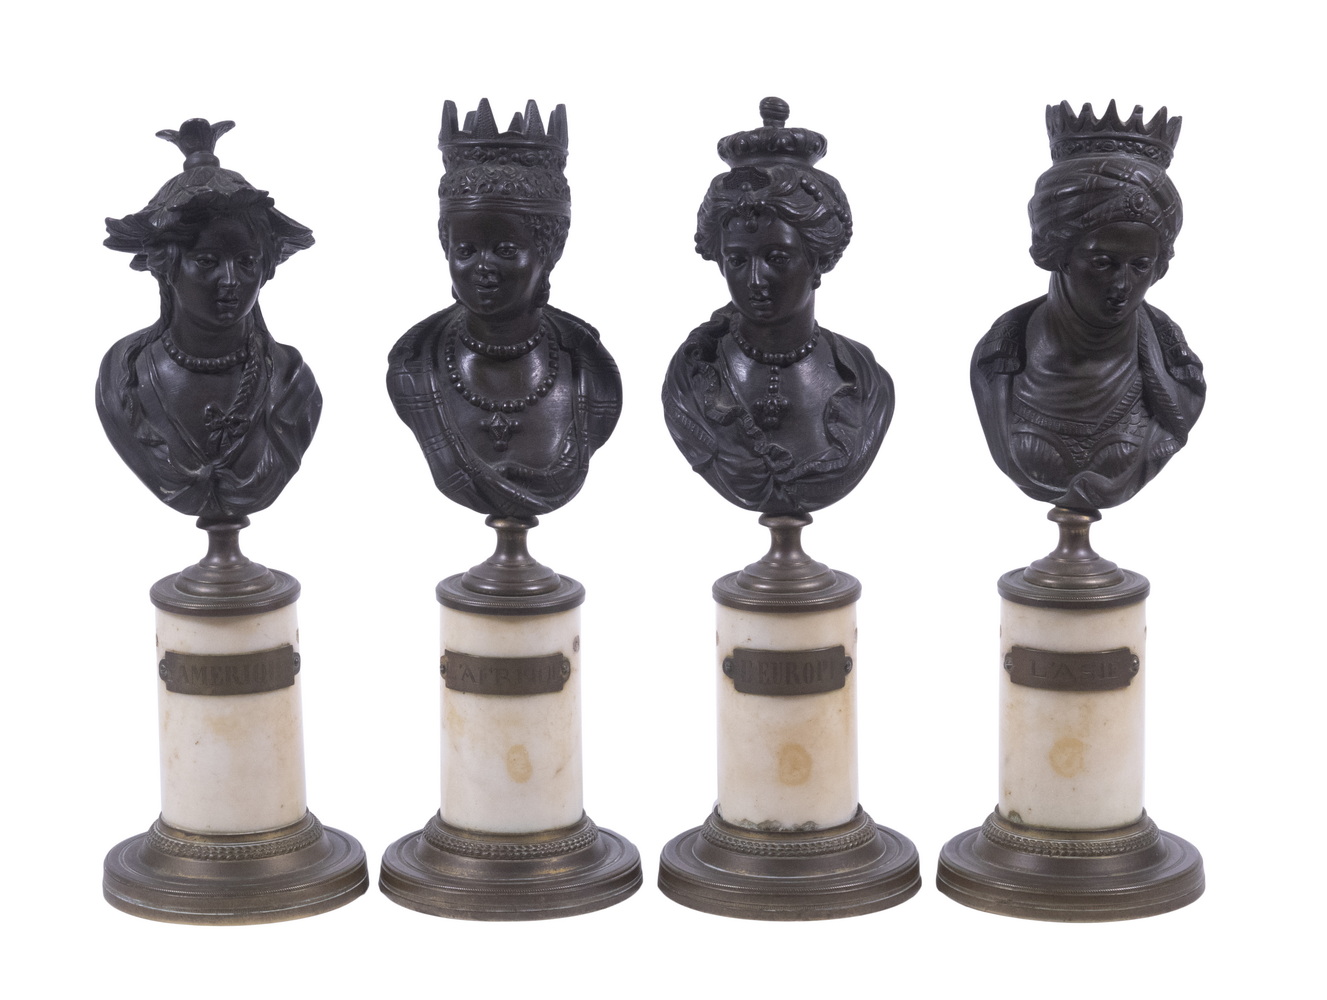 FRENCH BRONZE BUSTS DEPICTING THE 33dda8